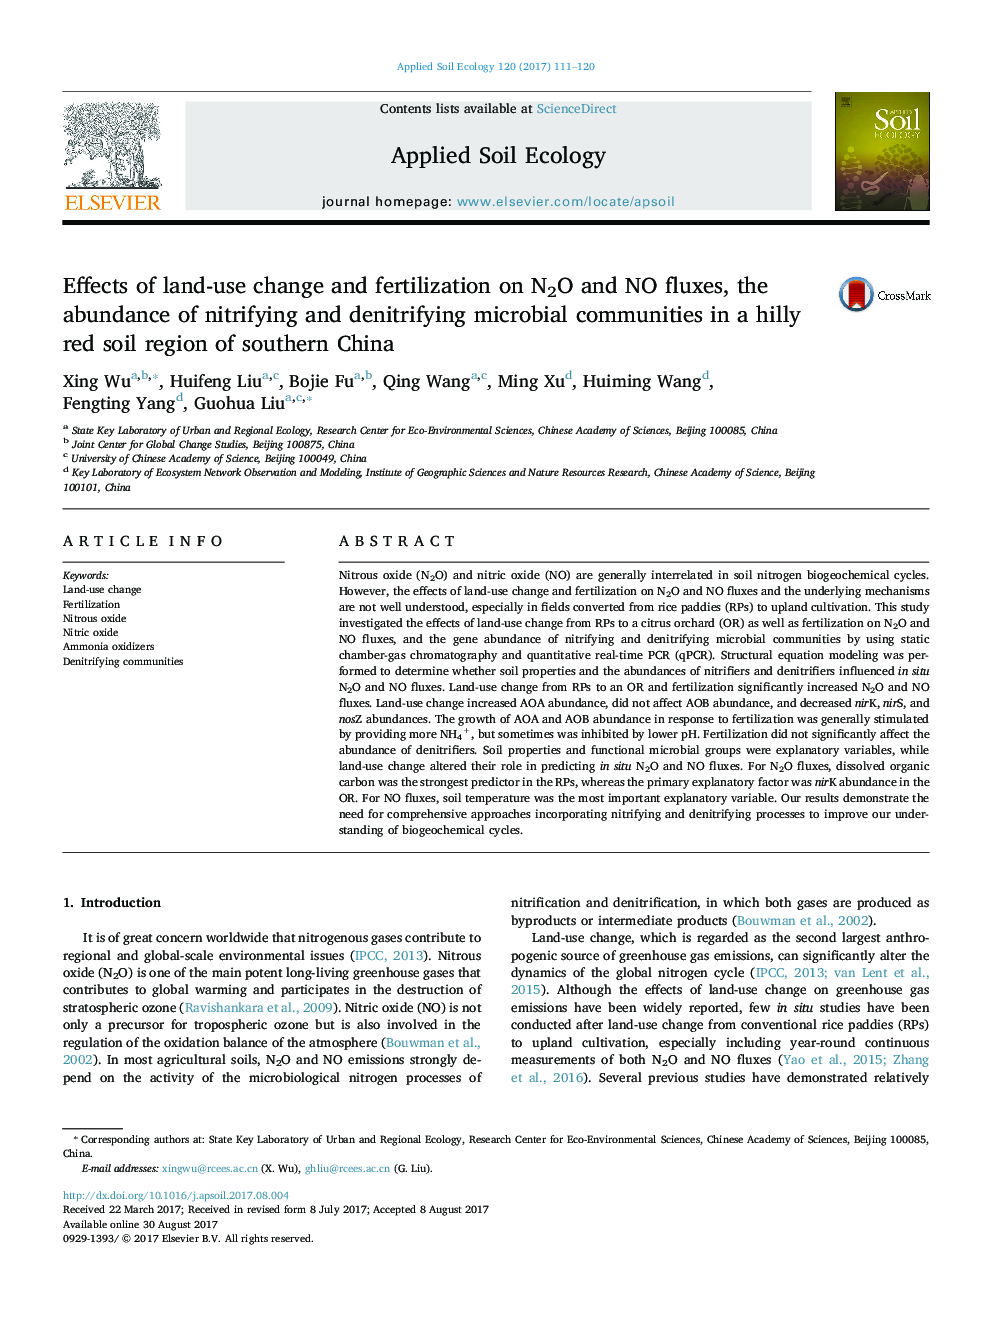 Effects of land-use change and fertilization on N2O and NO fluxes, the abundance of nitrifying and denitrifying microbial communities in a hilly red soil region of southern China